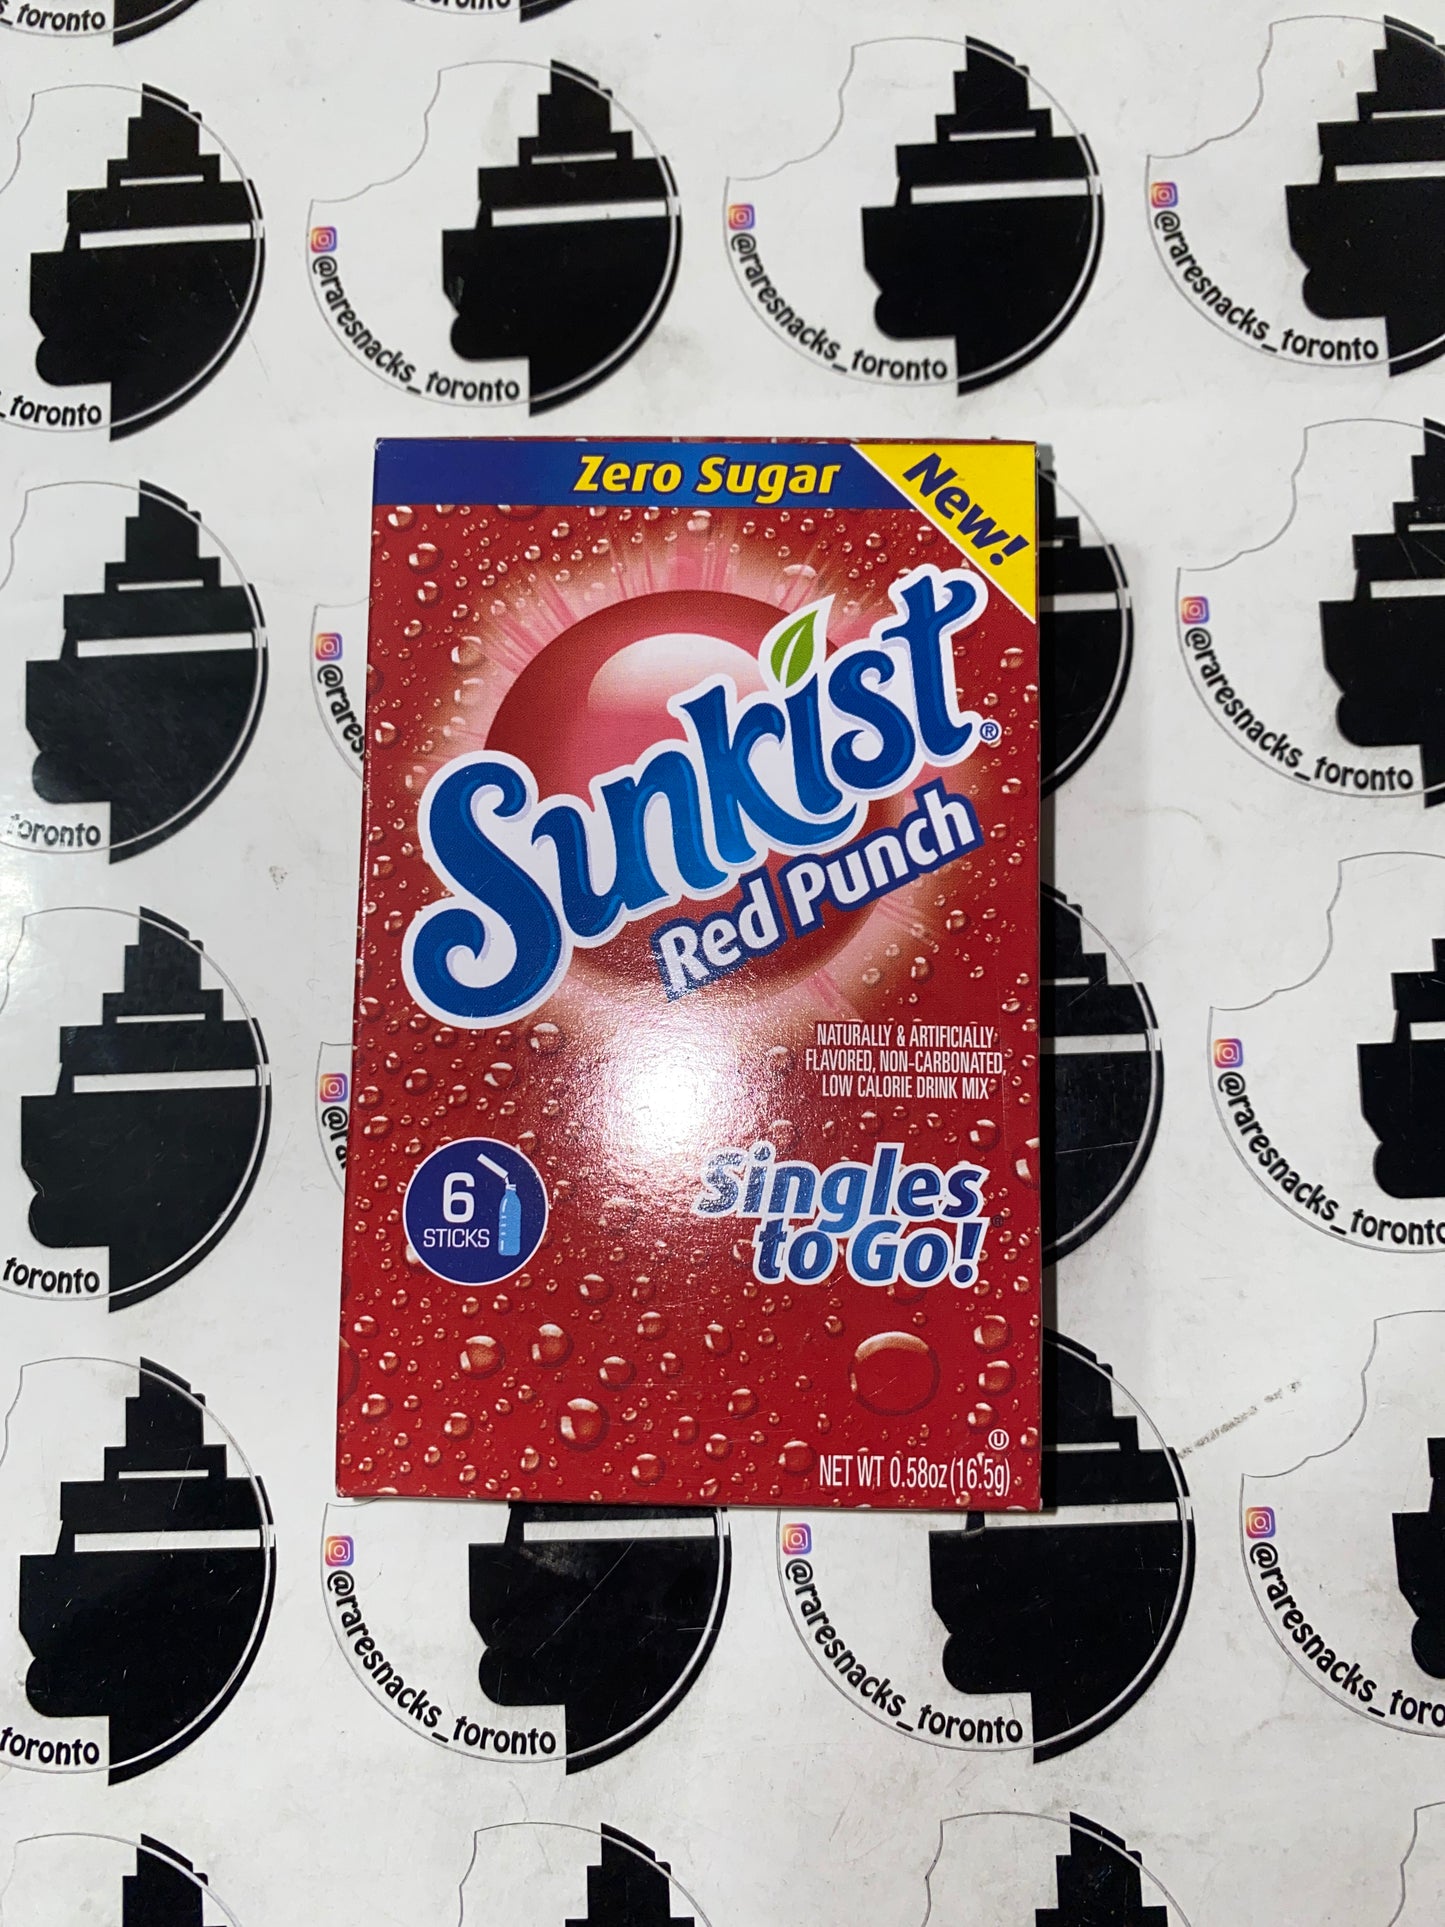 Sunkist Red Punch Singles to Go